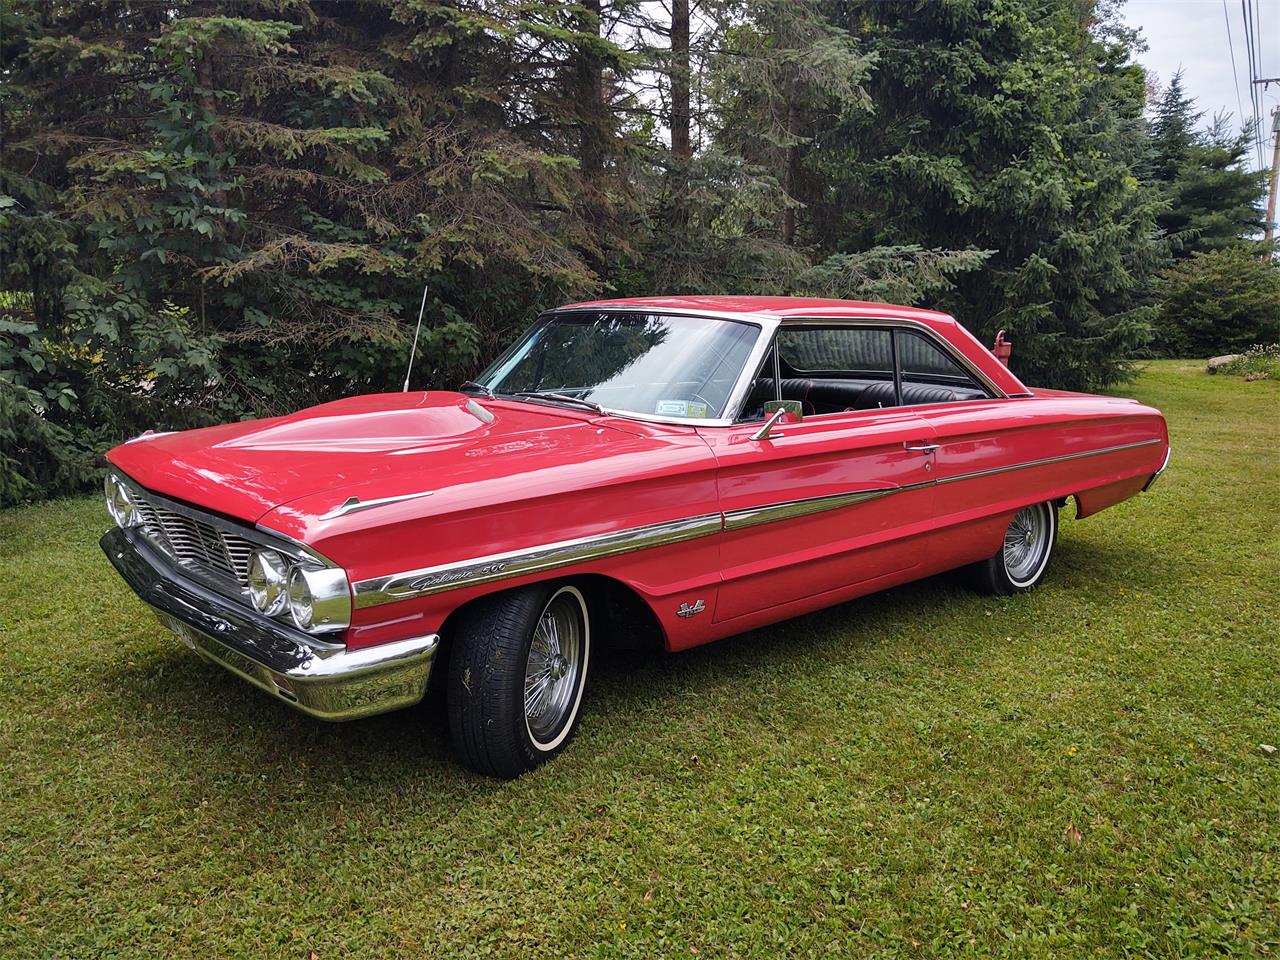 1964 Ford Galaxie 500 in Forestville, New York